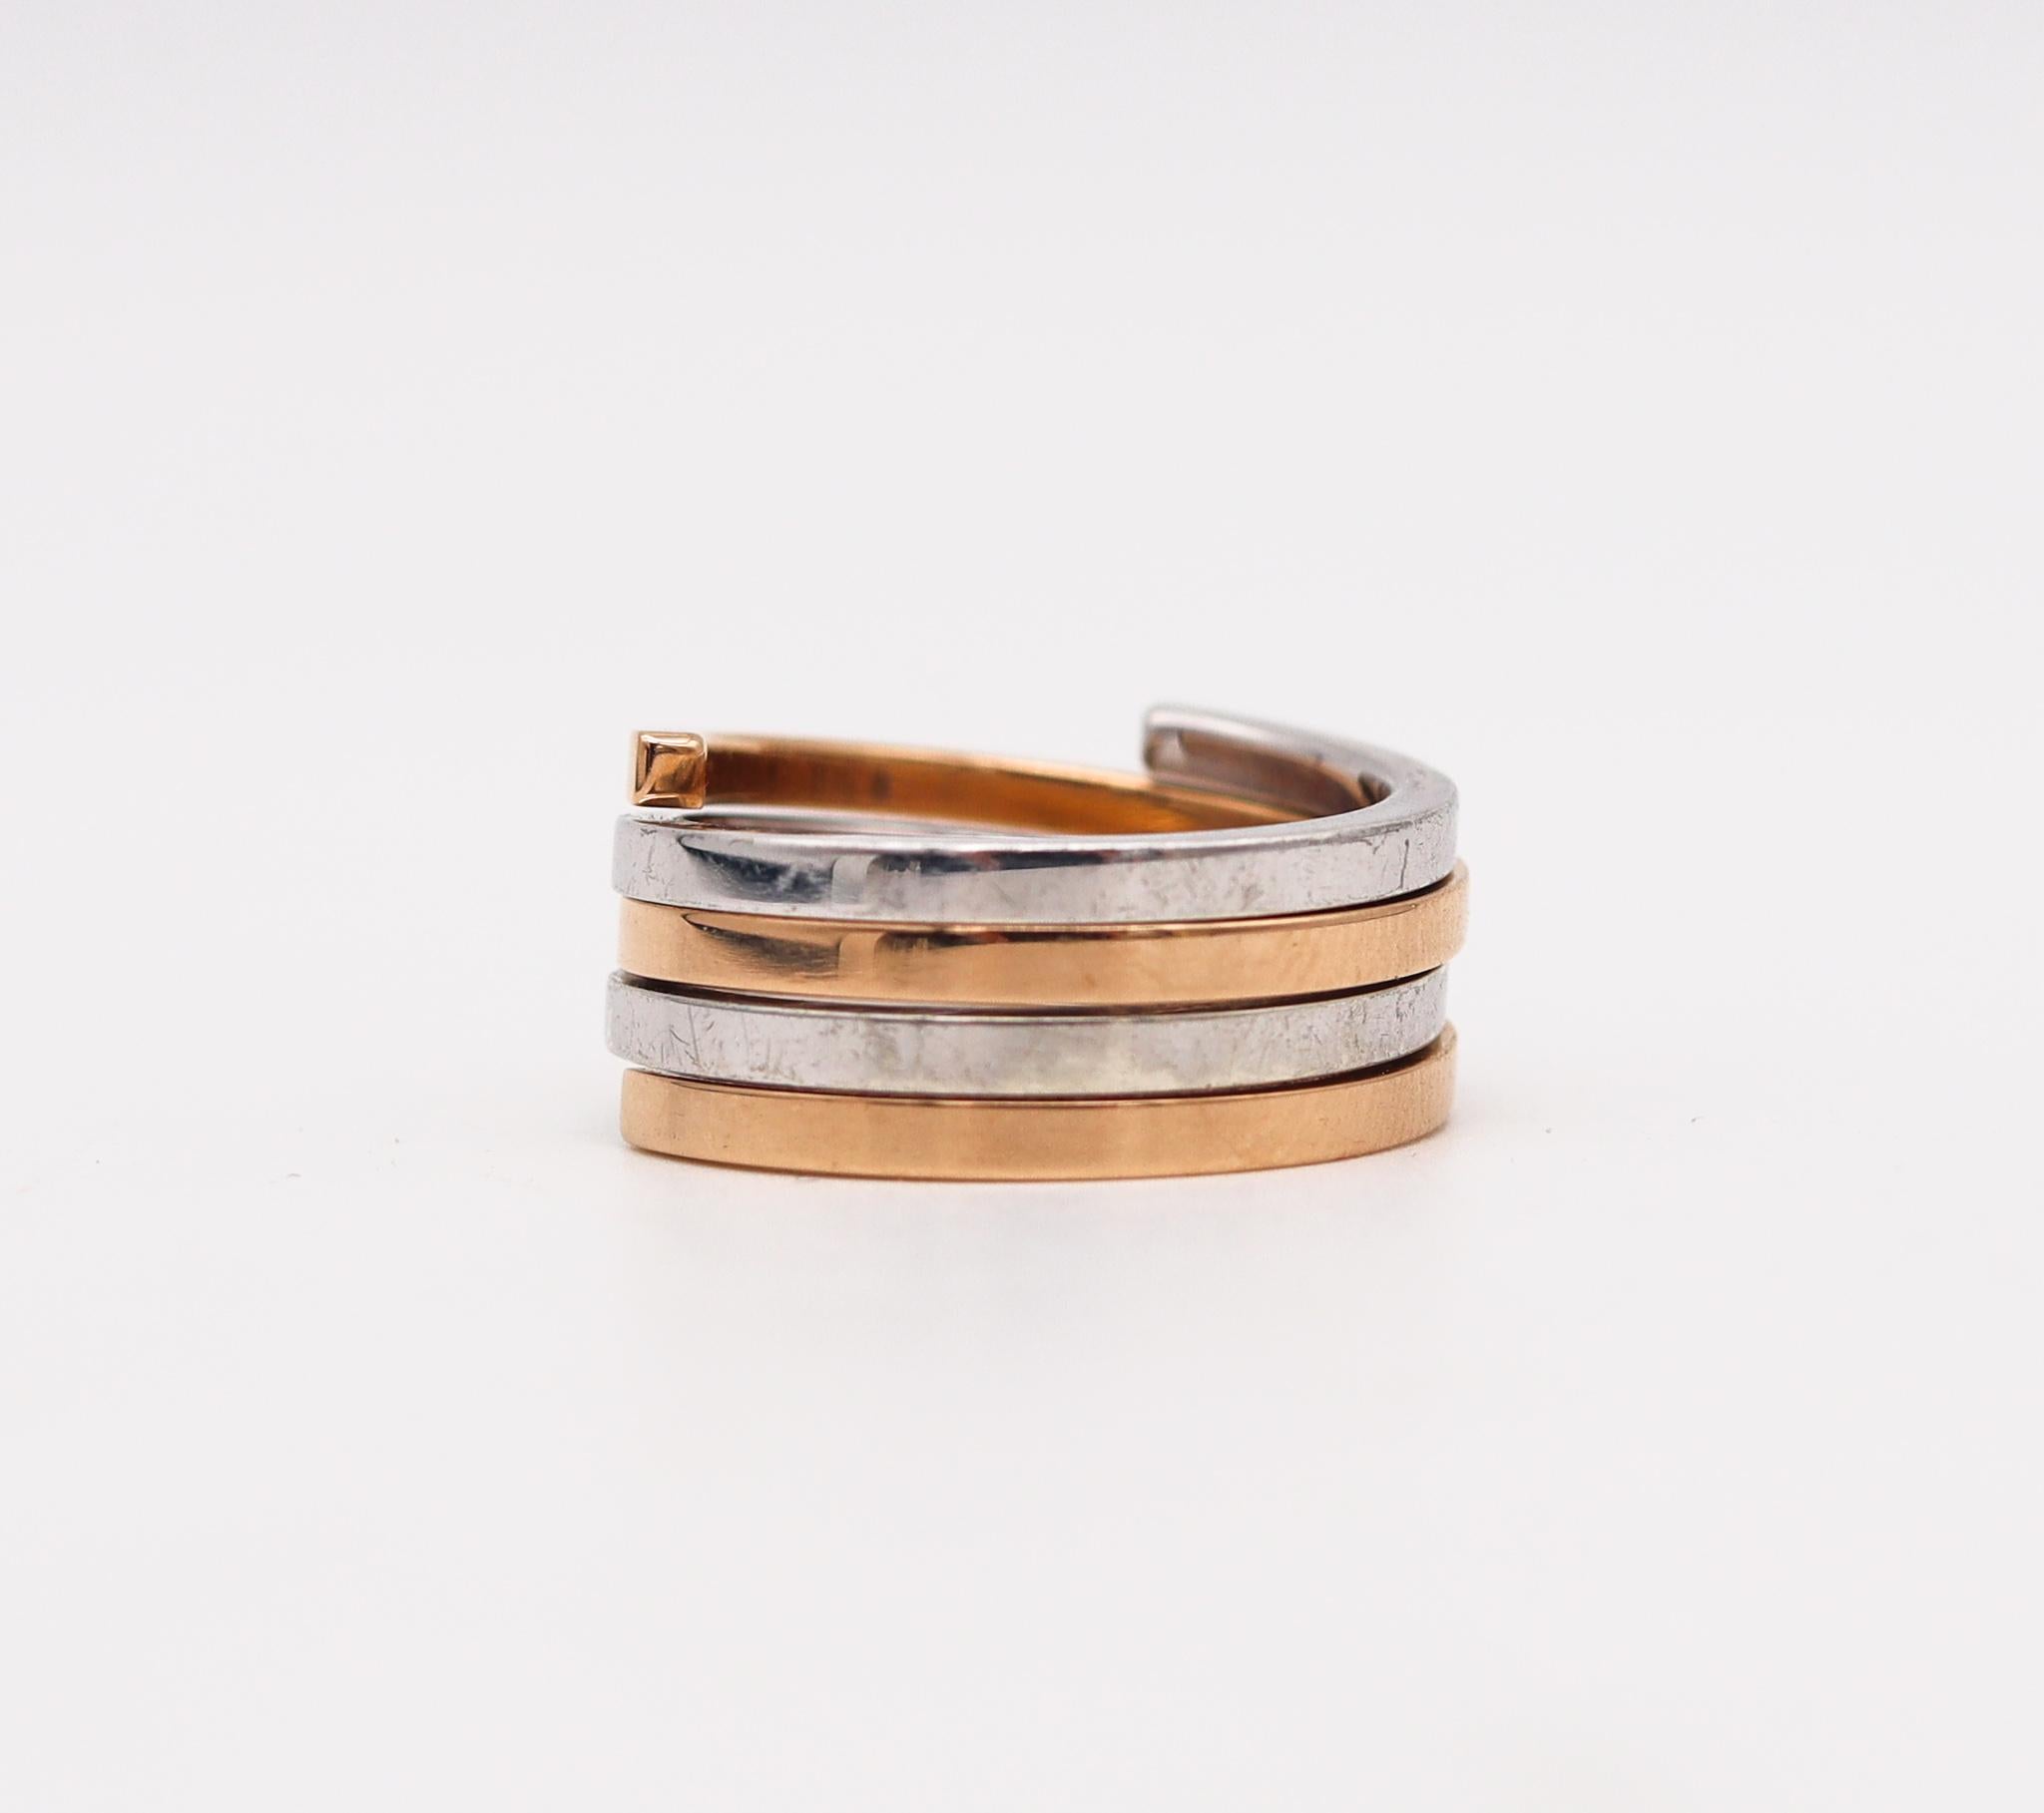 Geometric spirals rings designed by Jean Dinh Van.

Stunning geometric modernist piece, created in Paris, France at the jewelry atelier of the iconic designer Jean Dinh Van, back in the 1980's, This lovely duo spirals rings has been crafted in solid